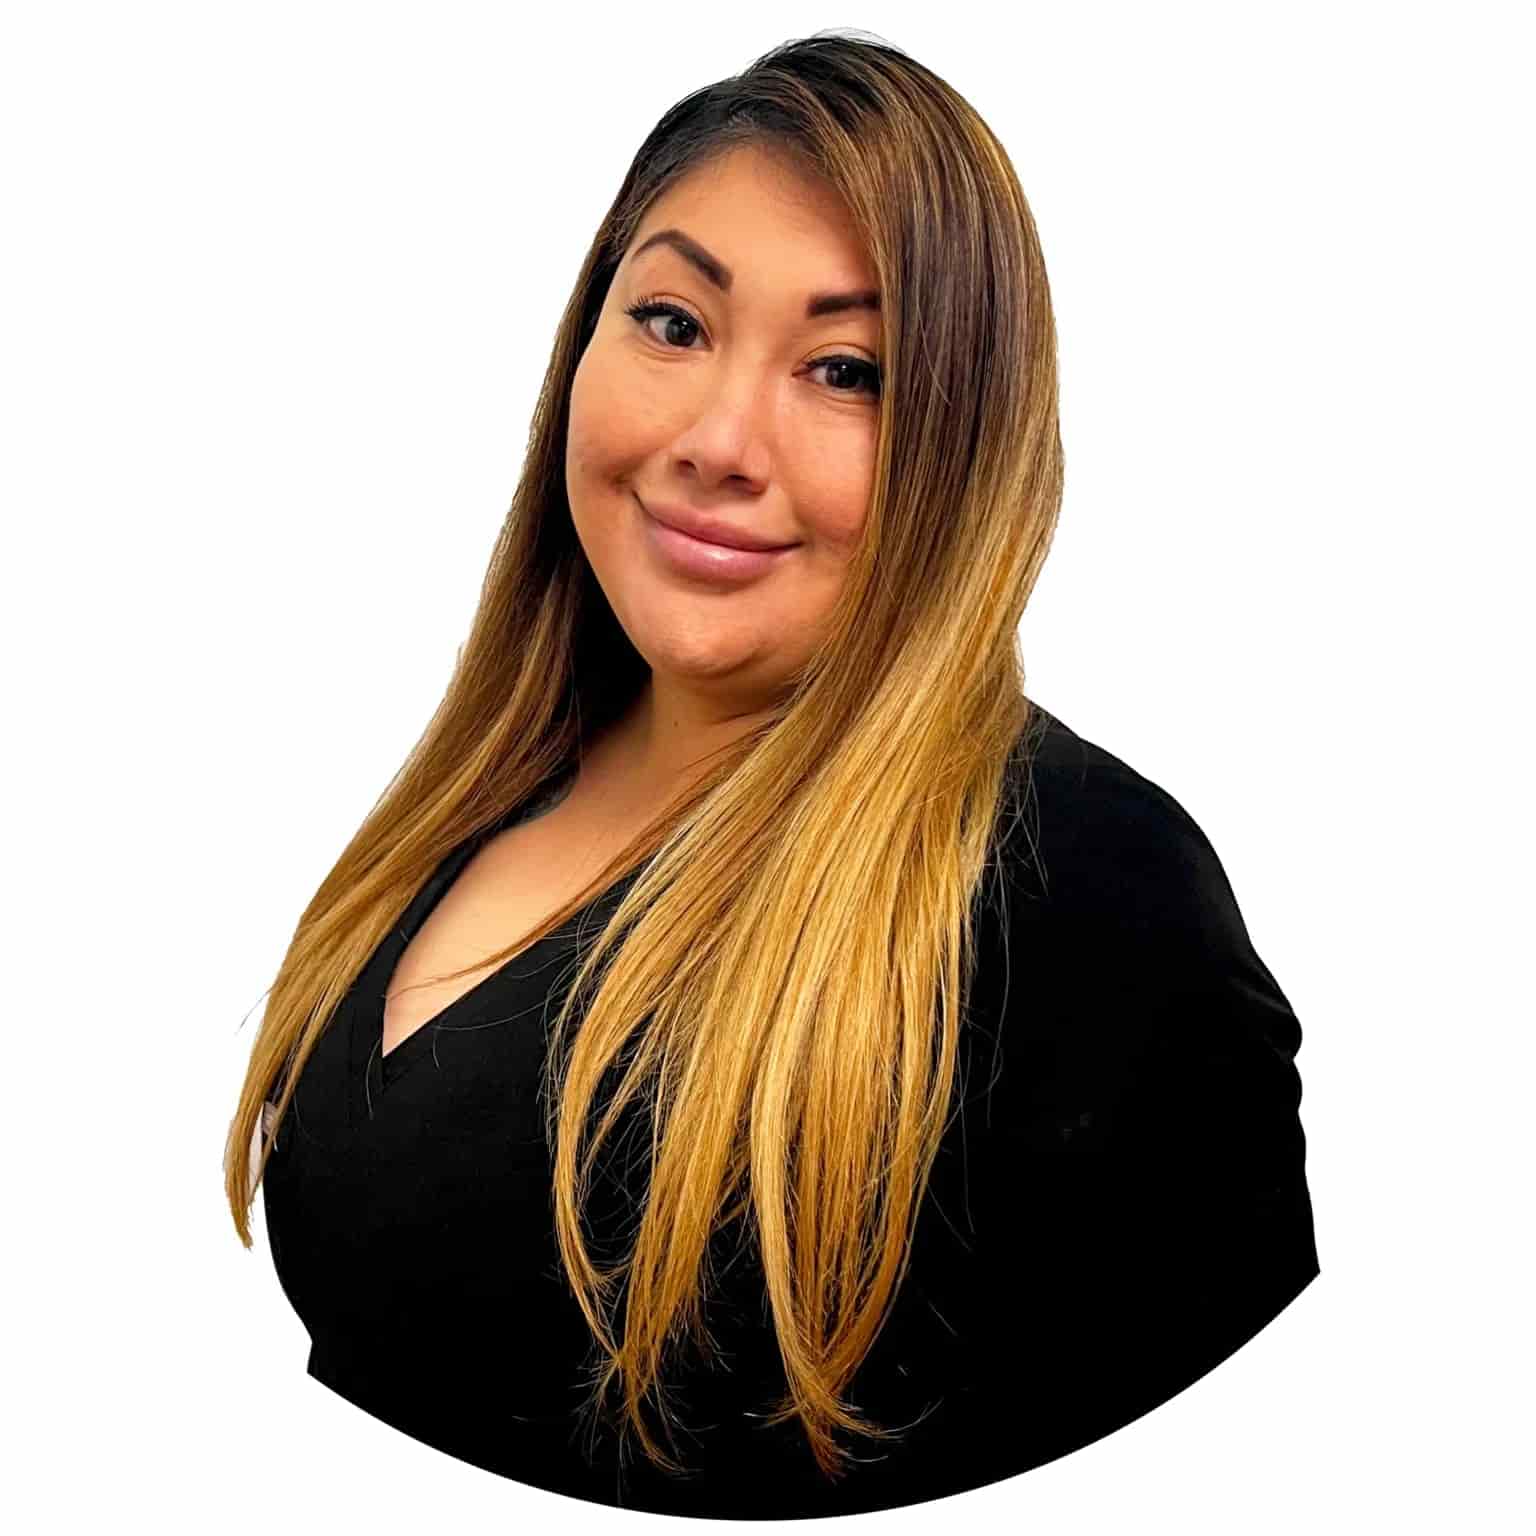 America Reyes Receptionist Ma At Make You Well Torrance